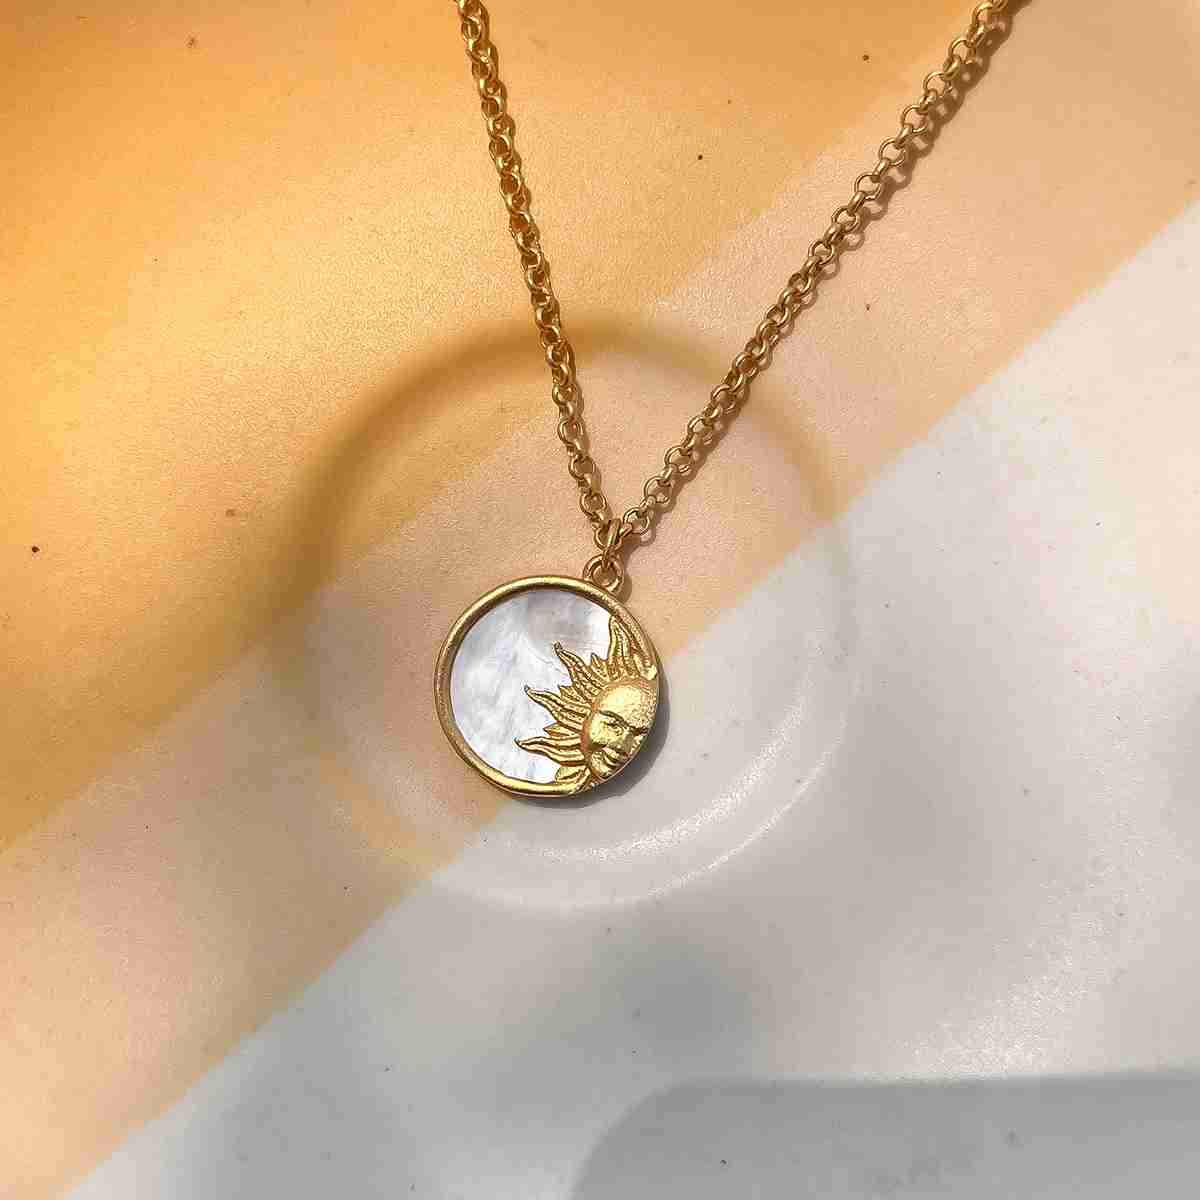 Magic of the Sun Necklace